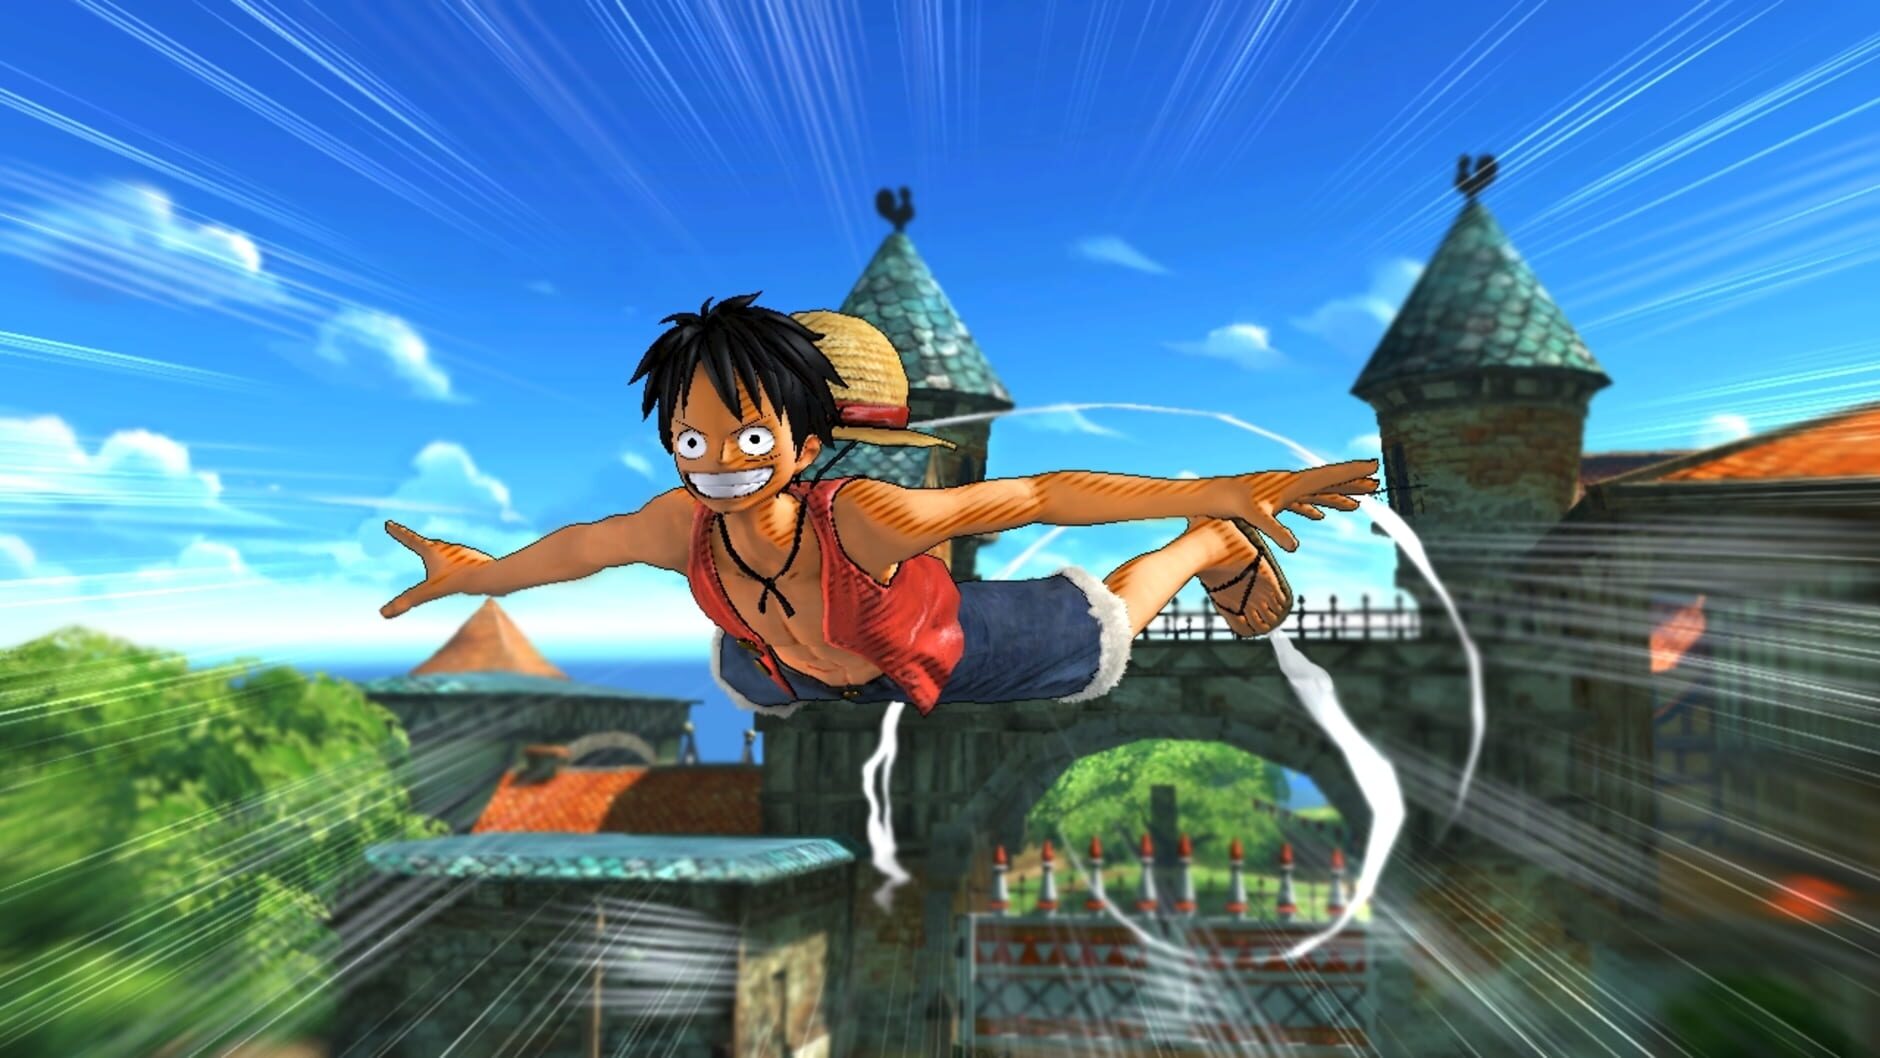 Screenshot for One Piece: Pirate Warriors - Collector's Edition